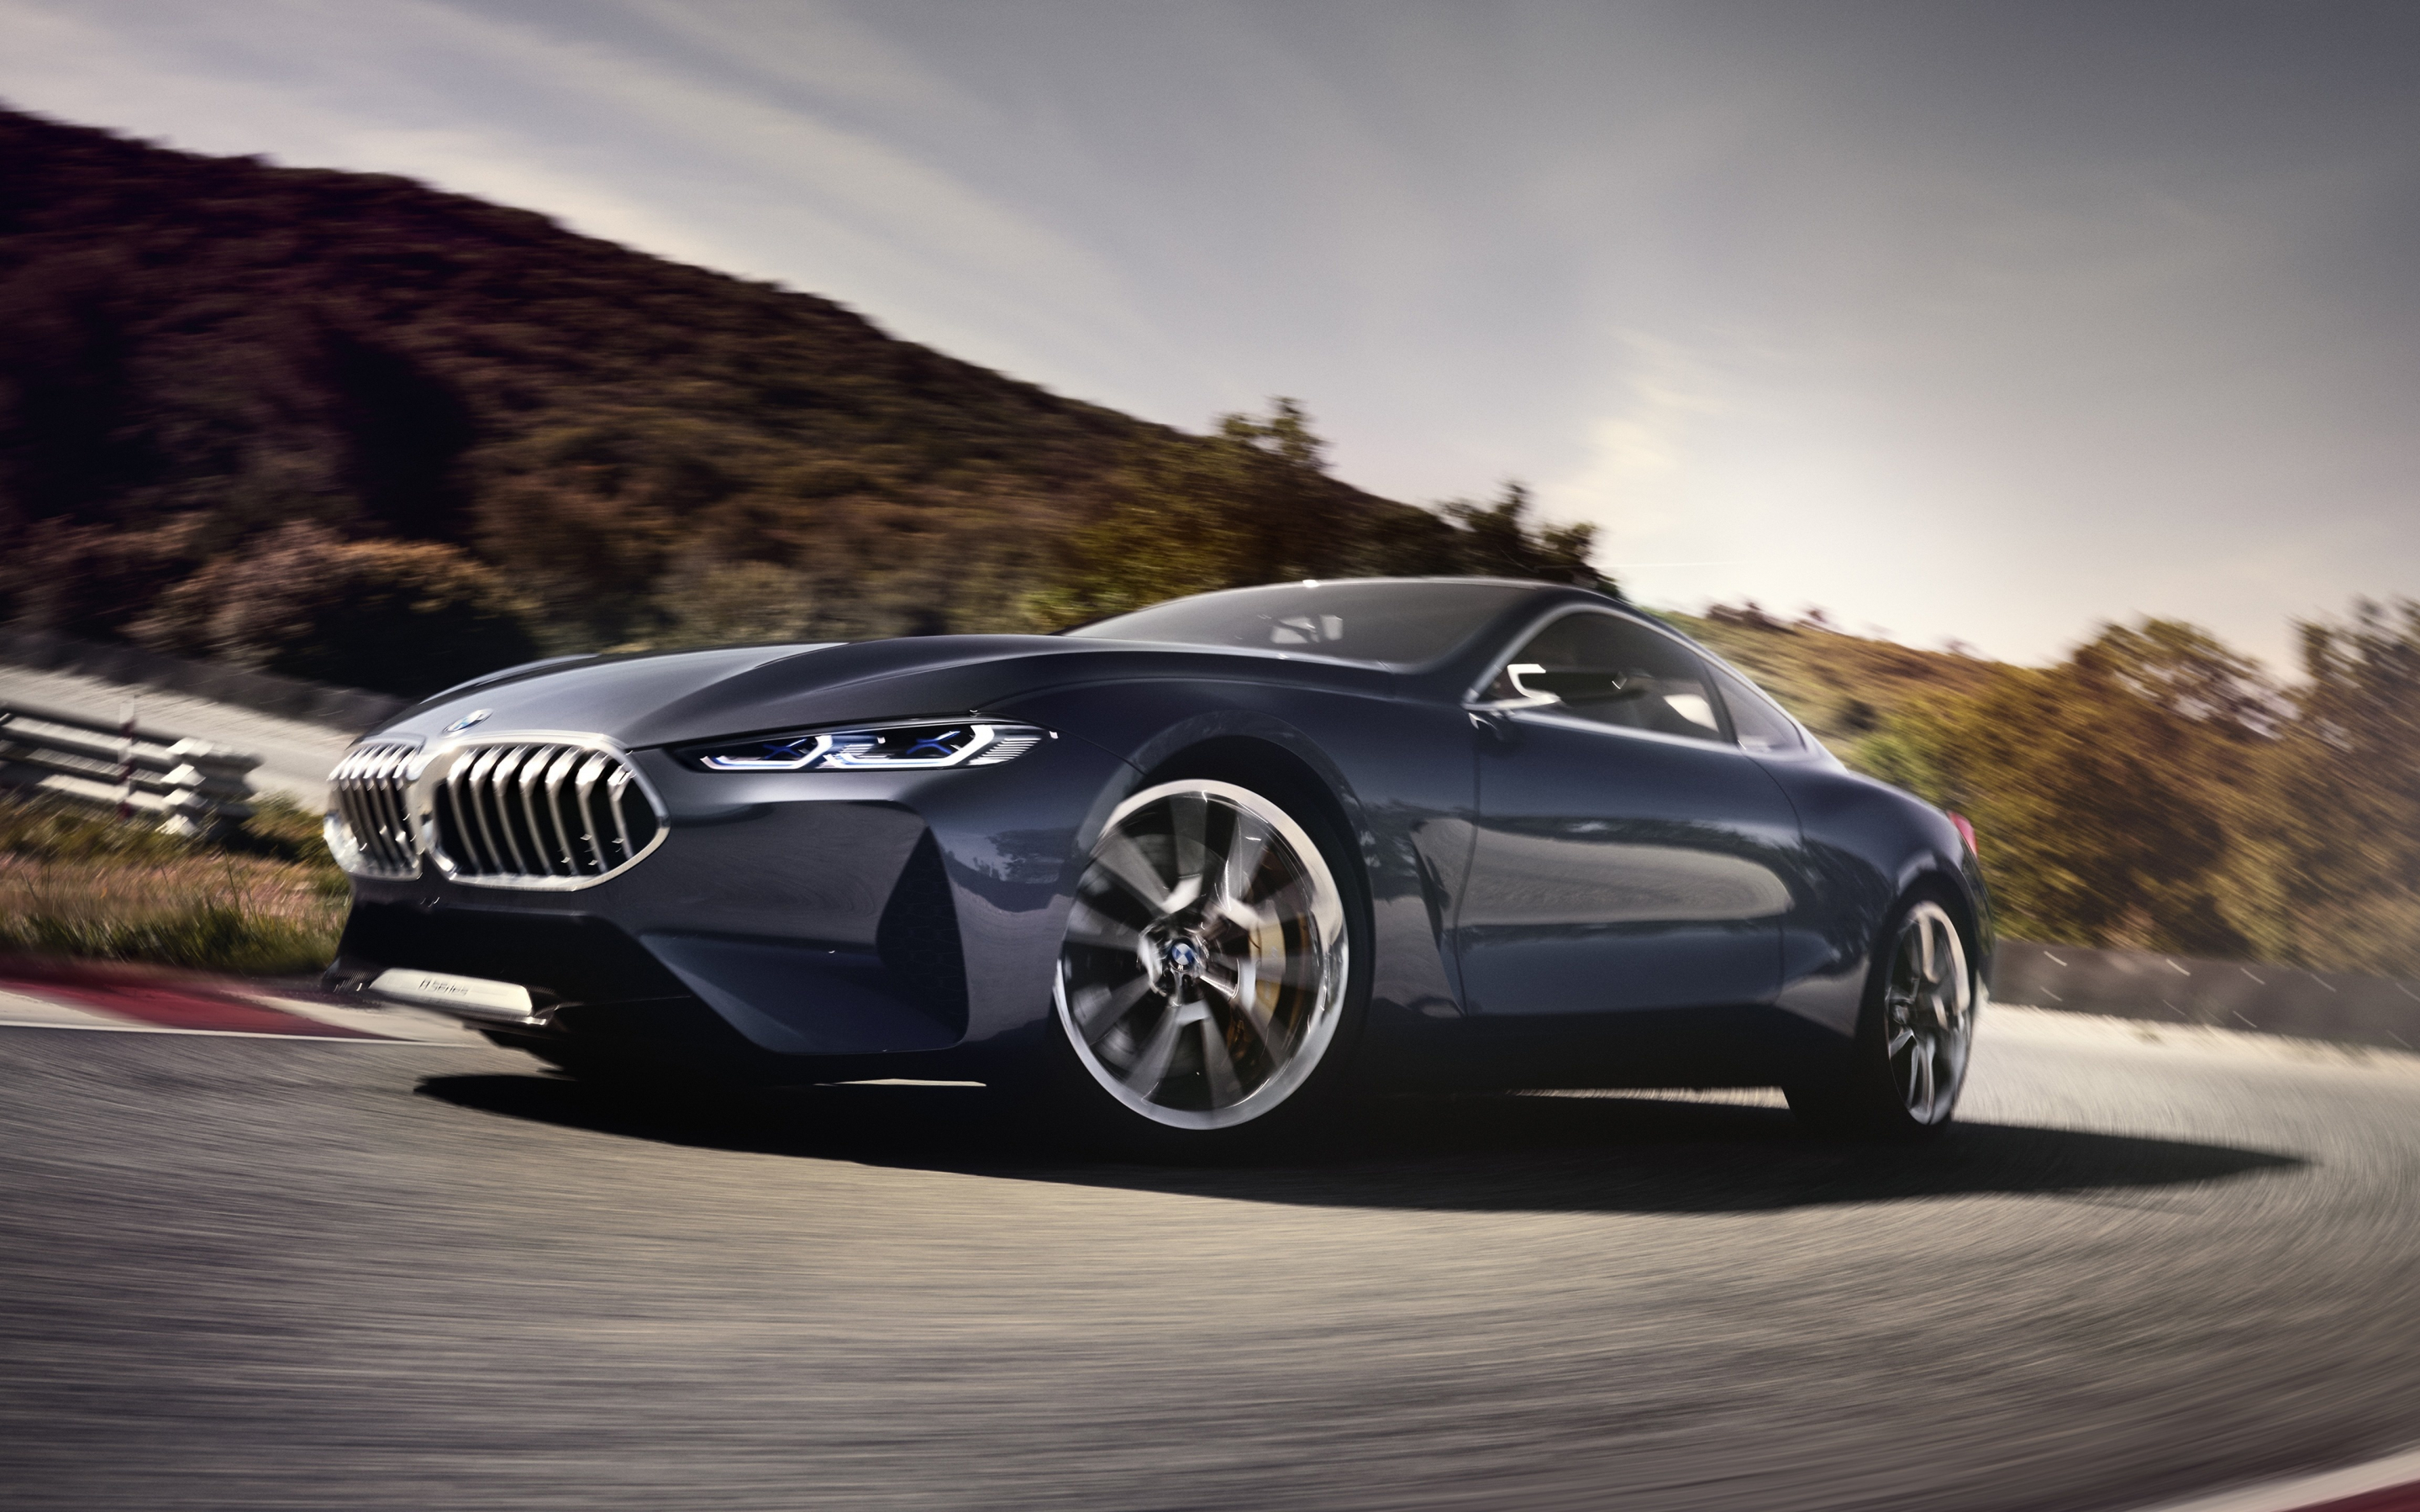 2018, on road, BMW concept 8 series, luxury car, 2880x1800 wallpaper